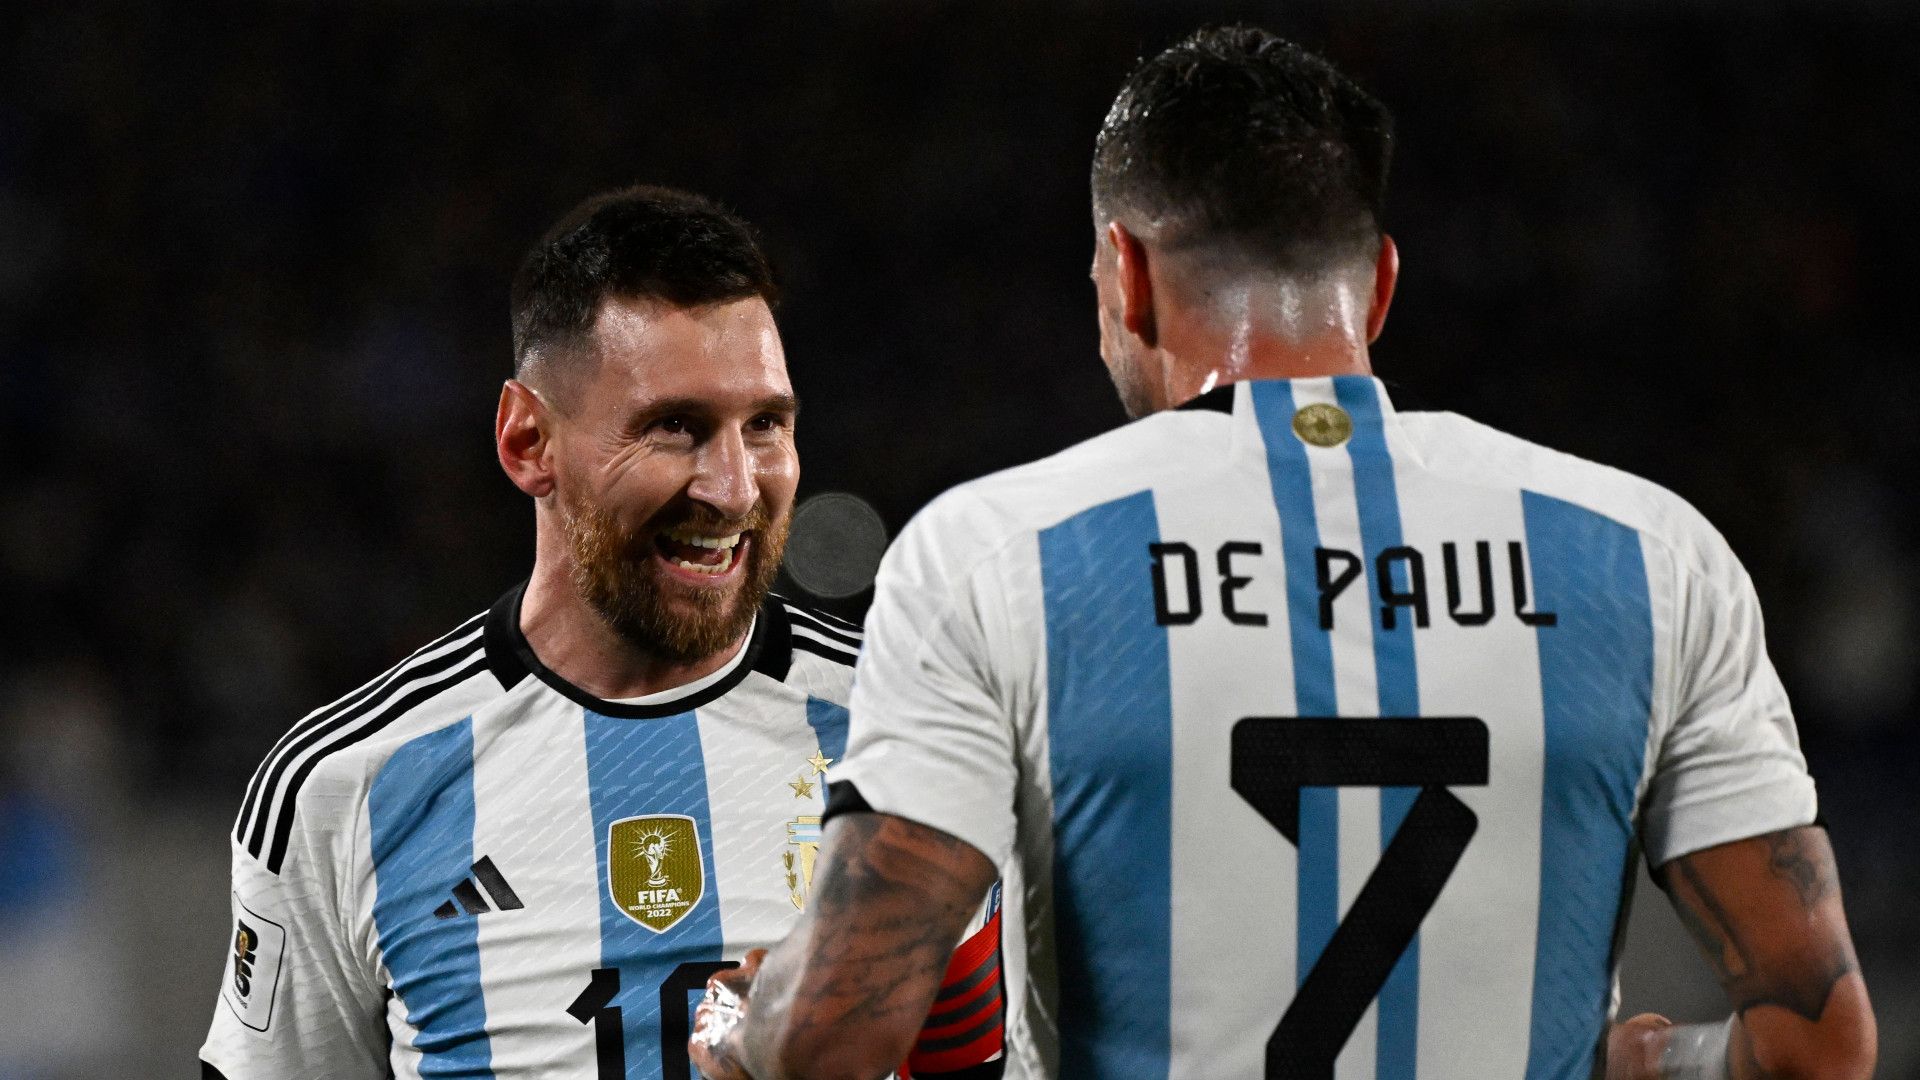 'Did you miss something?' - Lionel Messi teased by Rodrigo De Paul as Argentina midfielder posts hilarious World Cup trophy image | Goal.com Malaysia